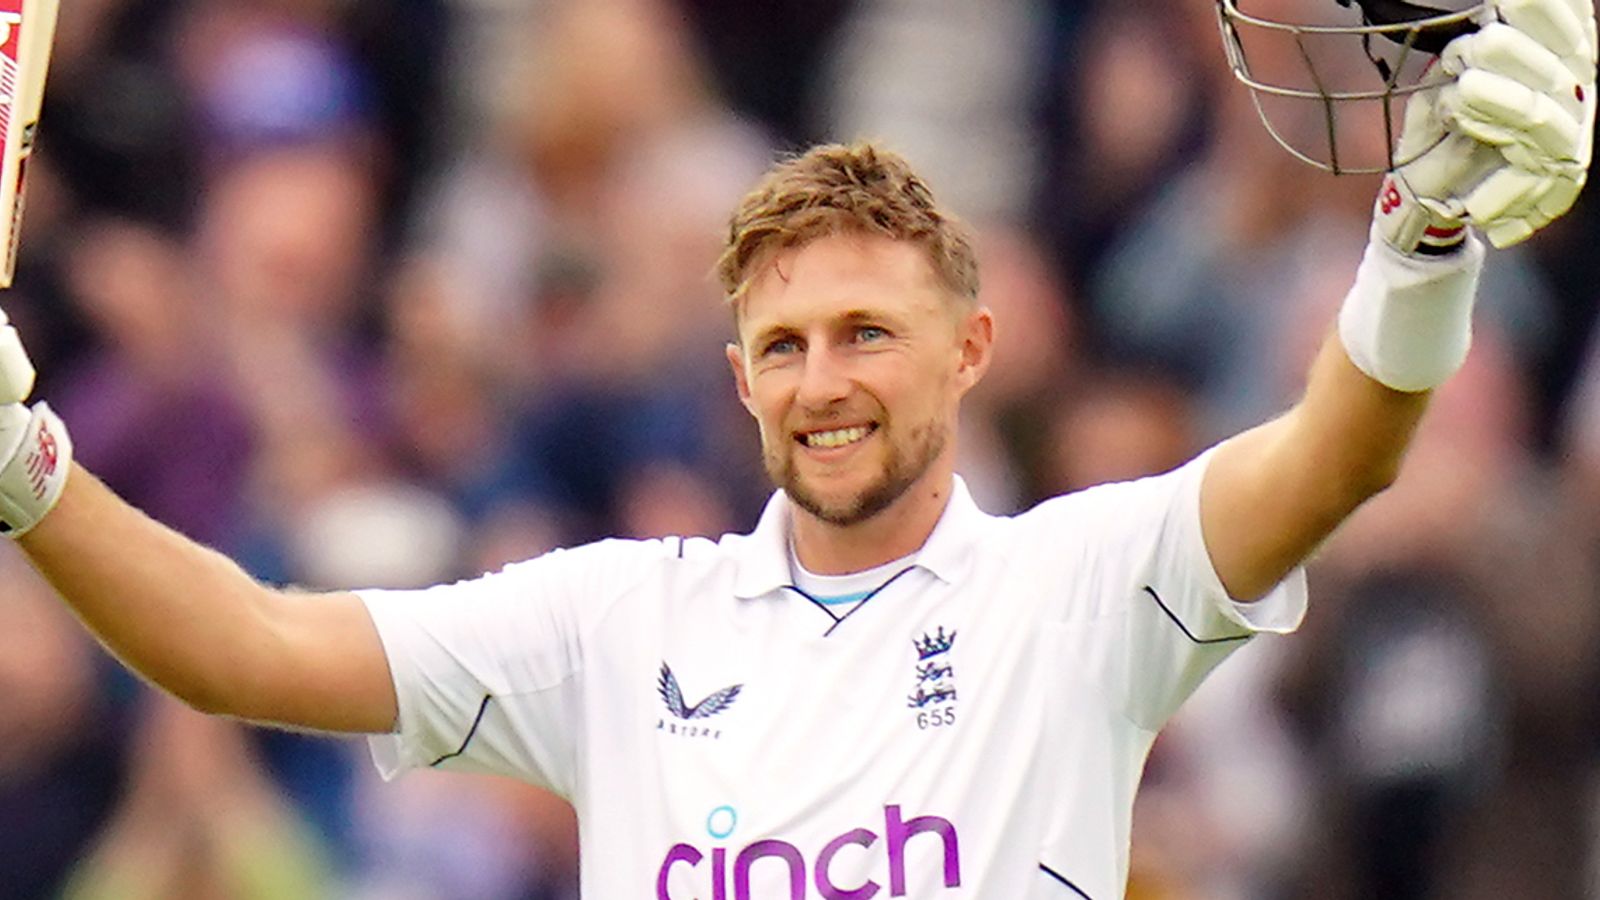 History for Joe Root and victory for England as former captain plays one of his greatest innings